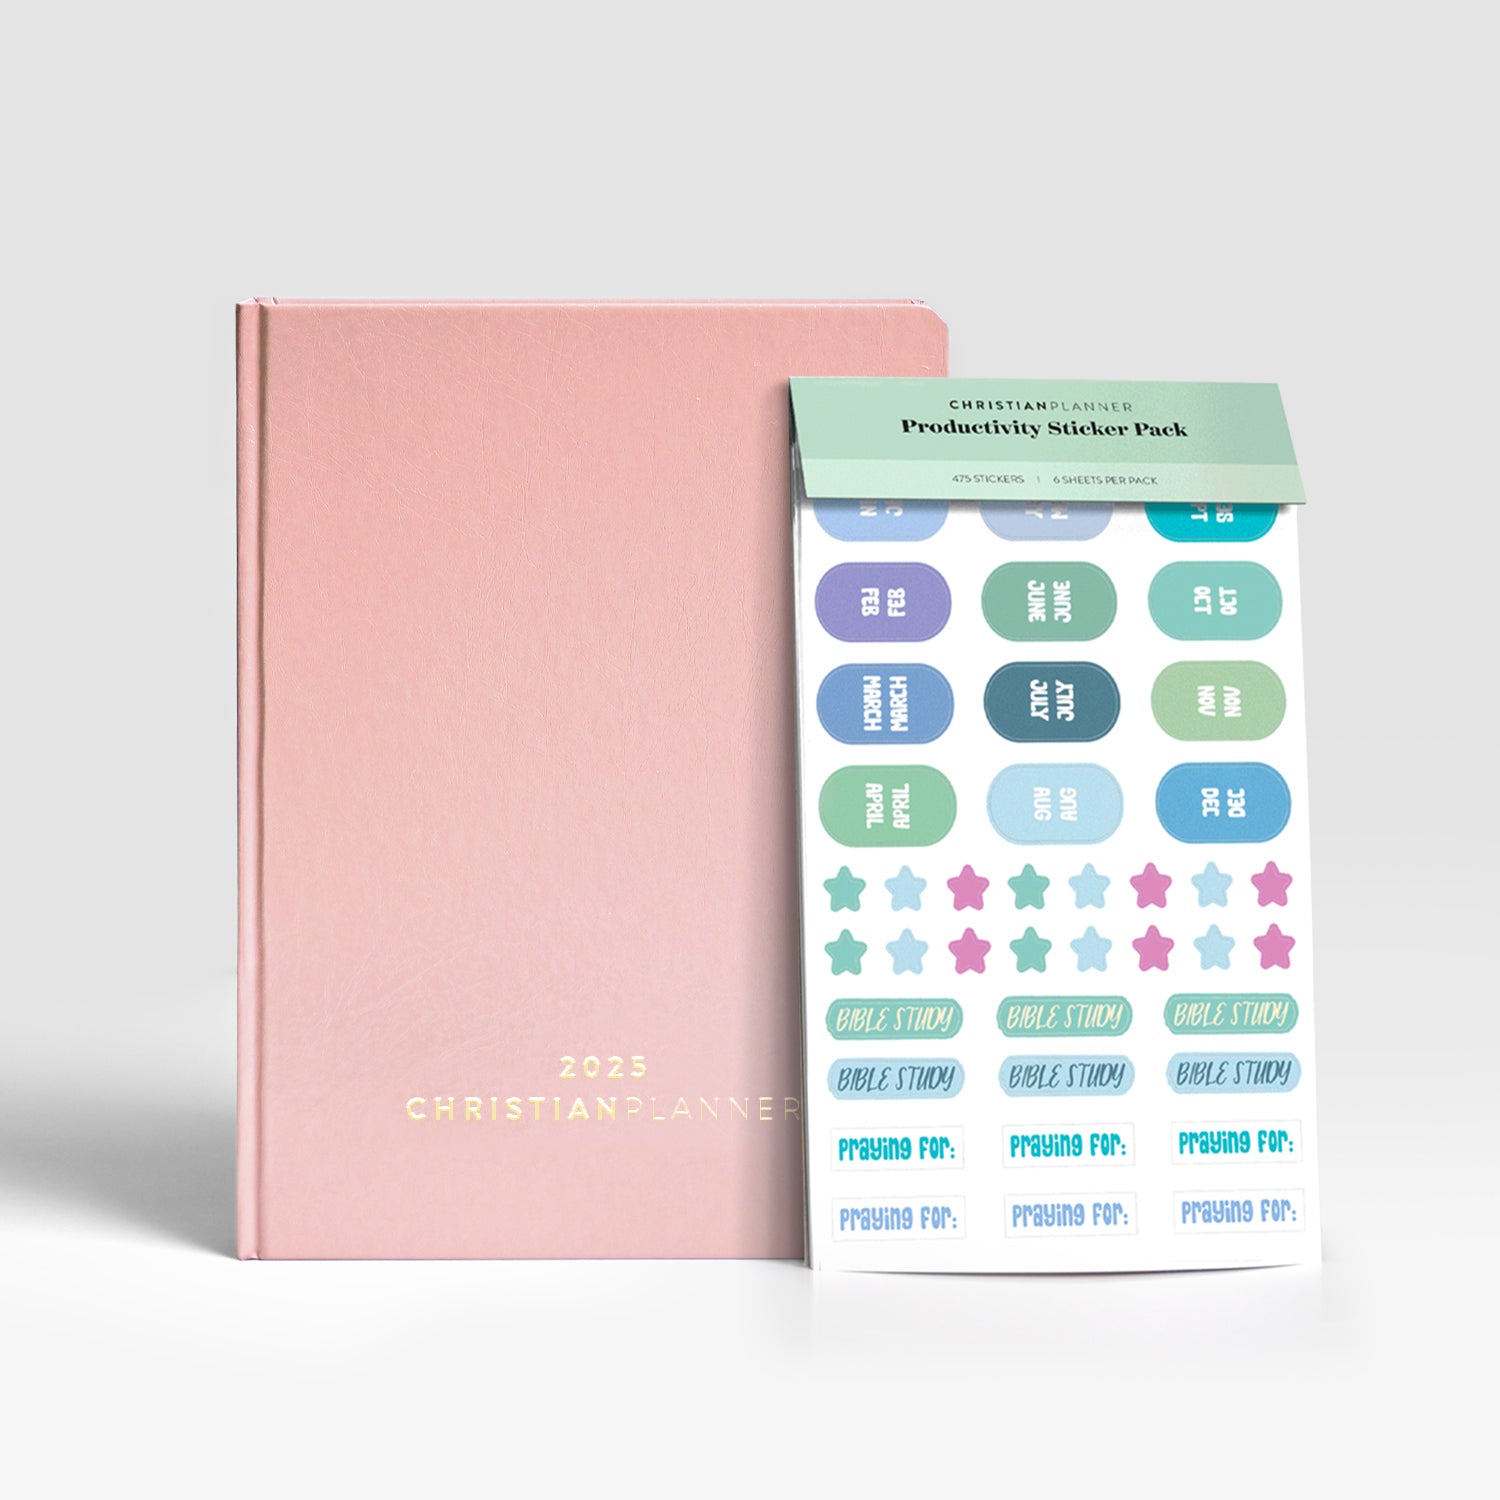 Hardcover Dust Pink